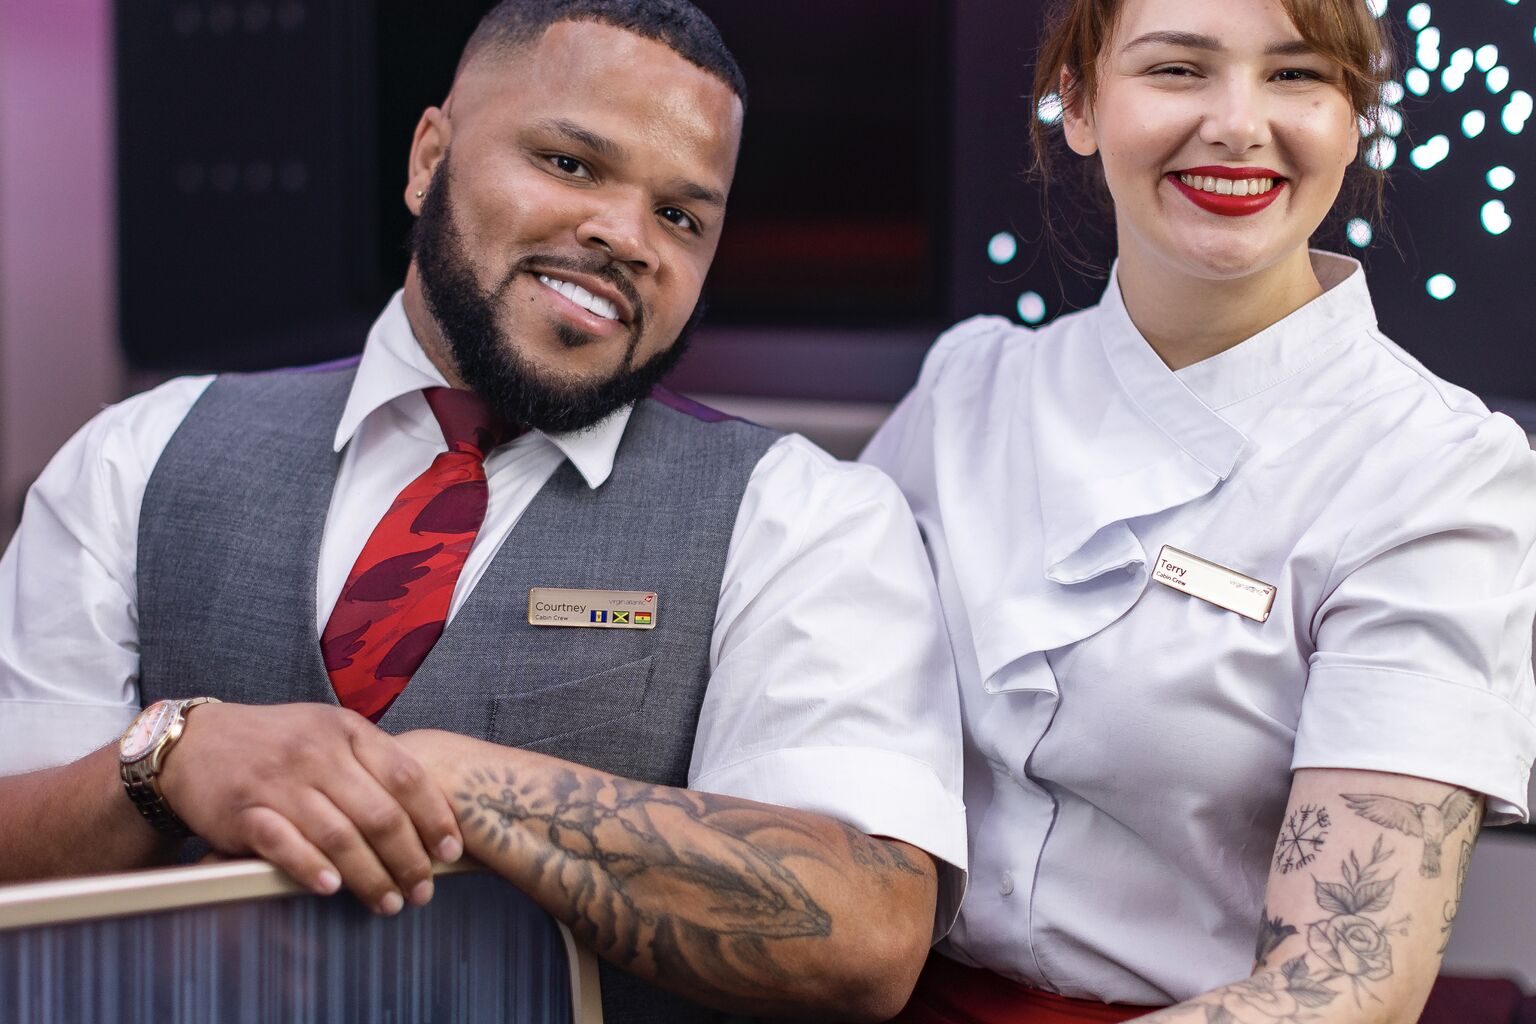 Virgin Atlantic becomes first UK airline to allow visible tattoos for cabin crew.